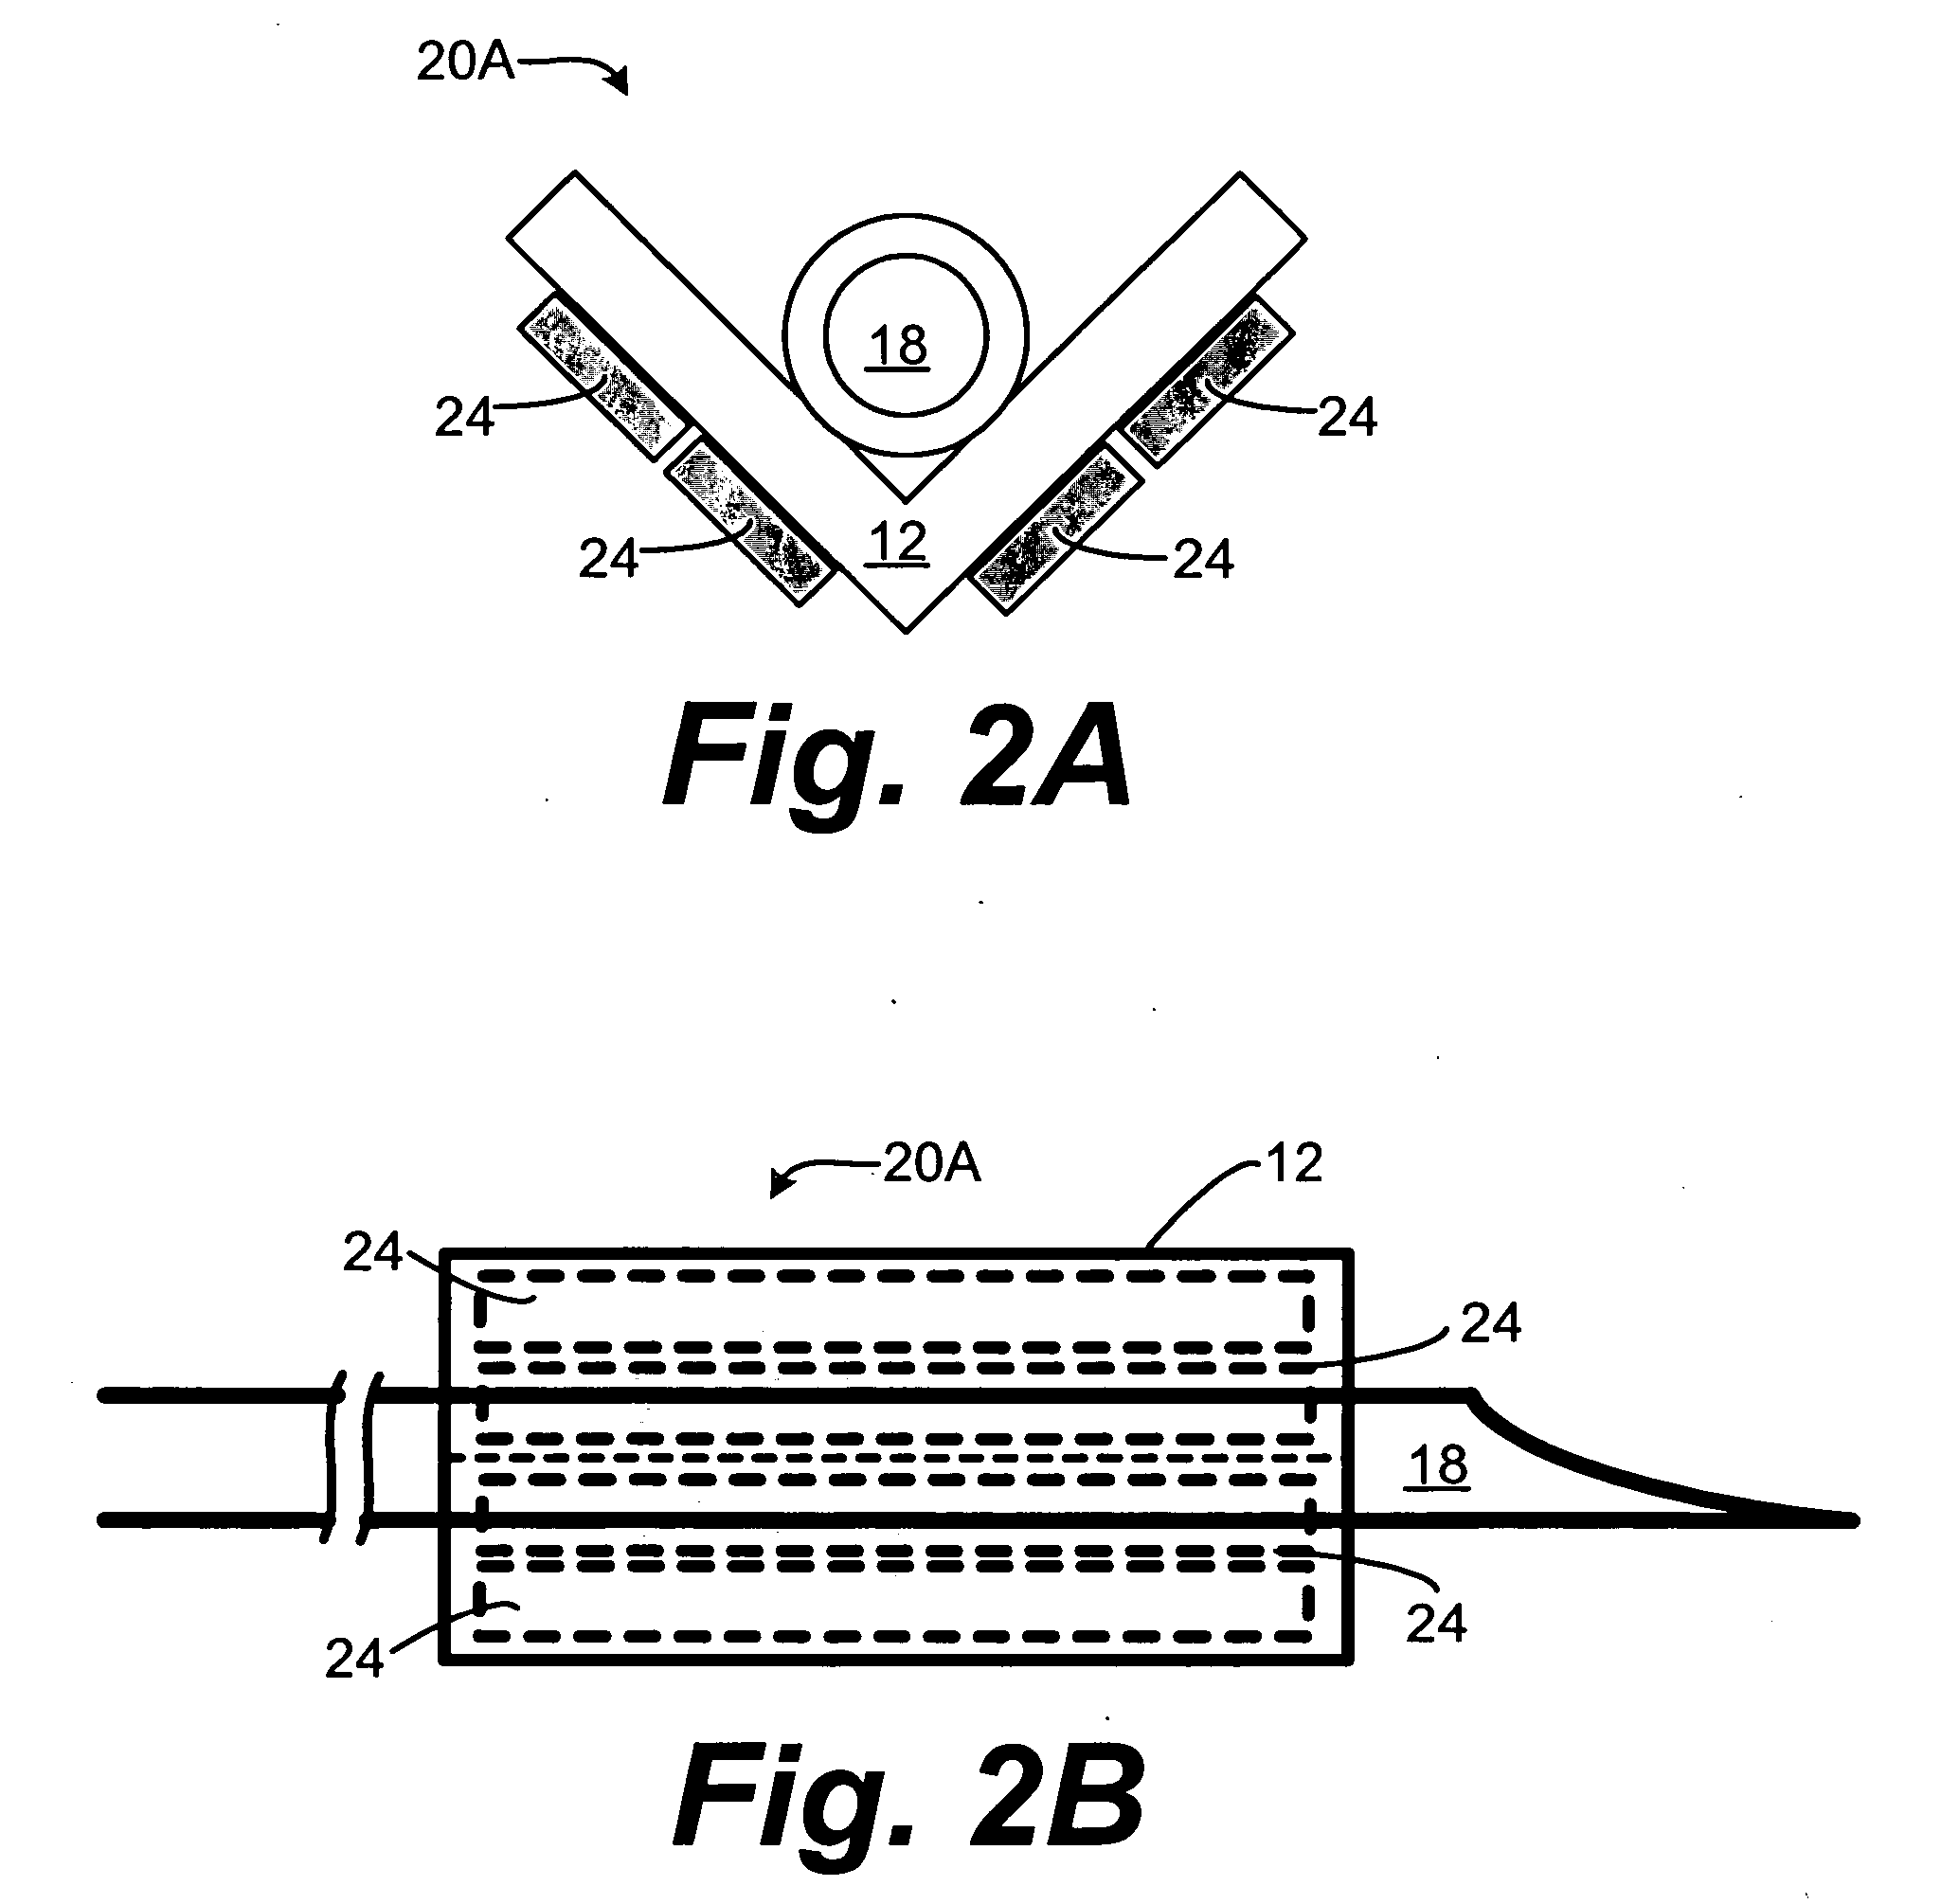 Apparatus and method for image guided insertion and removal of a cannula or needle